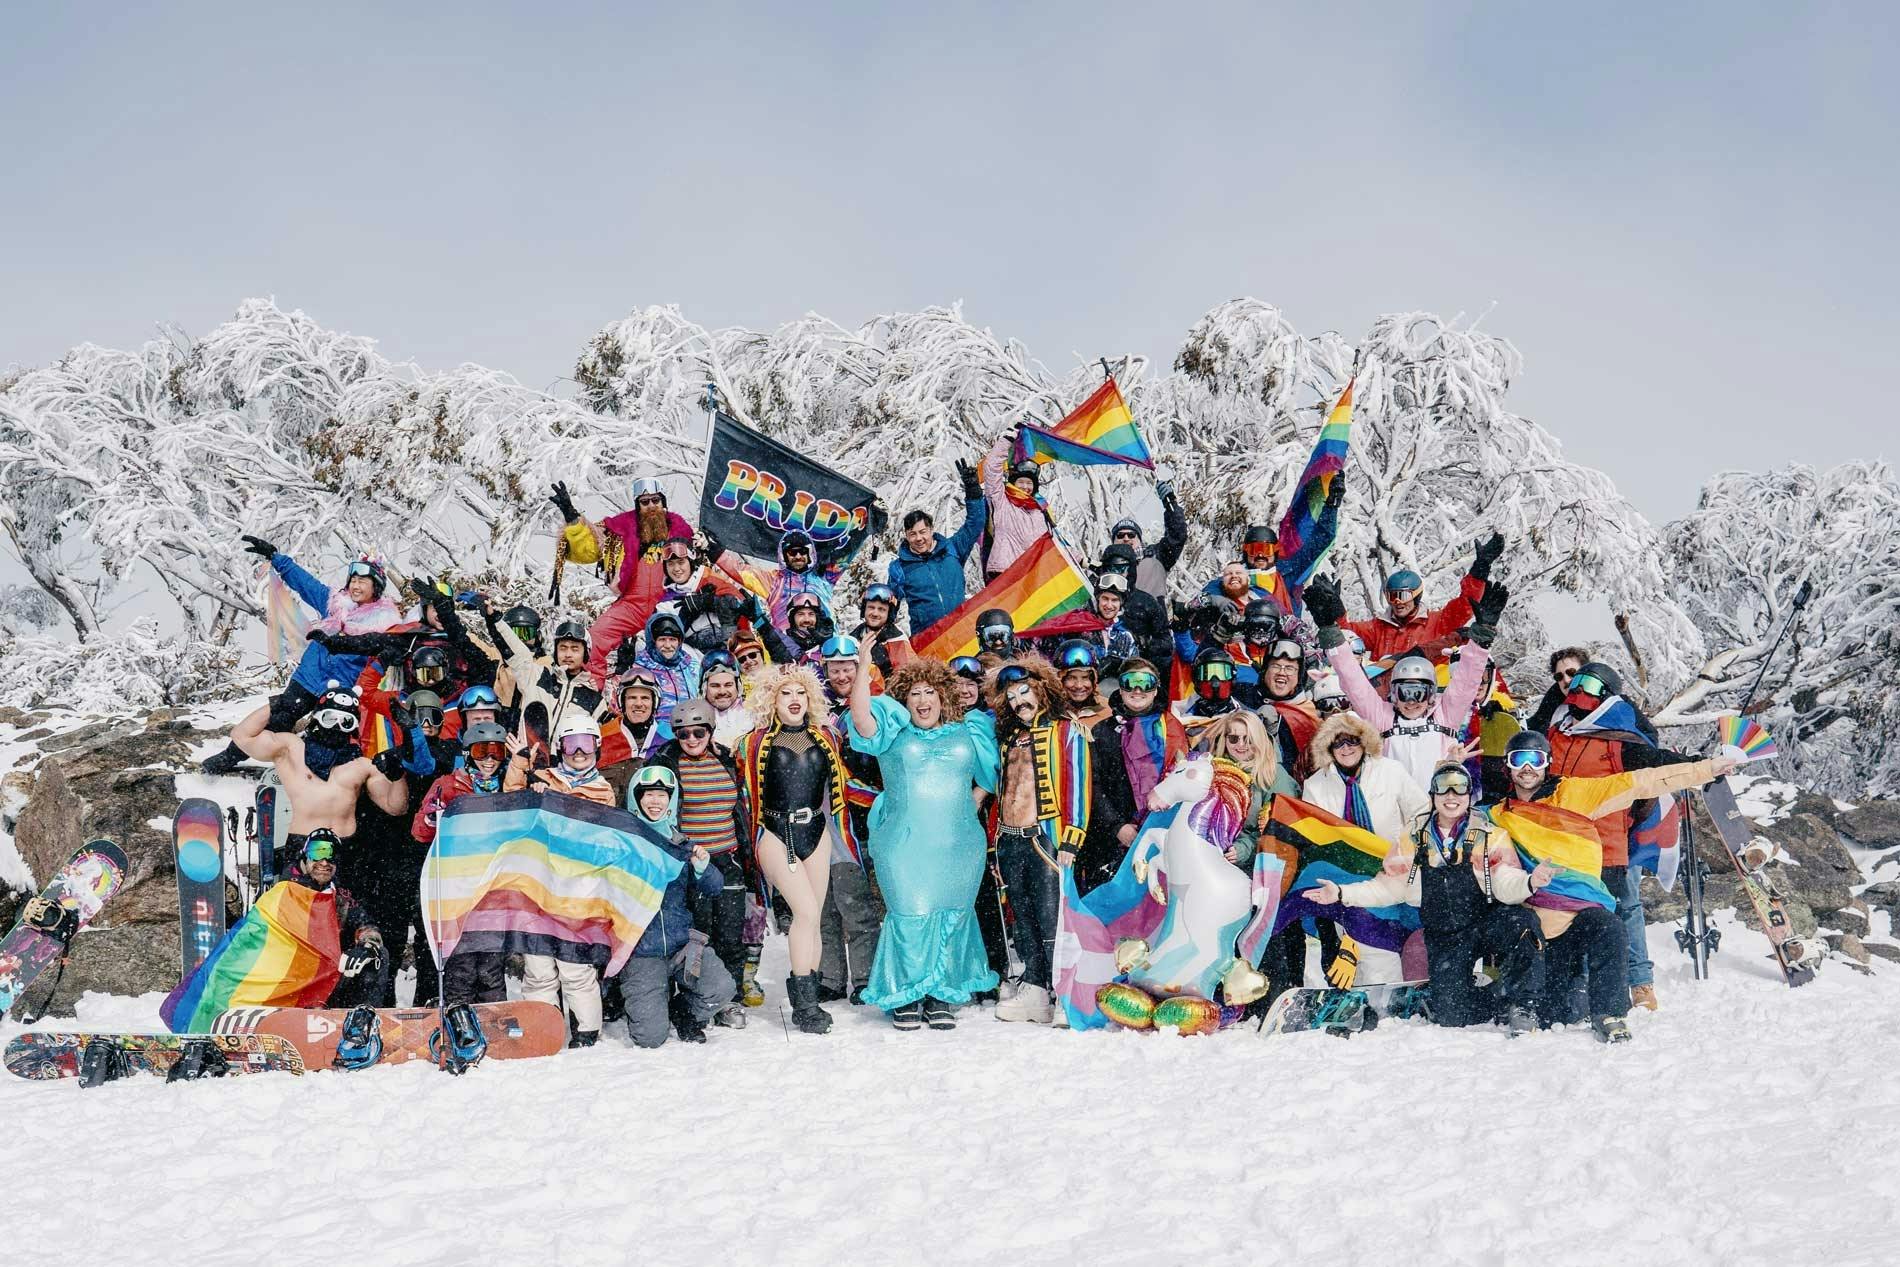 Participants for ski week in rainbow ski outfits and rainbow flags on the snow